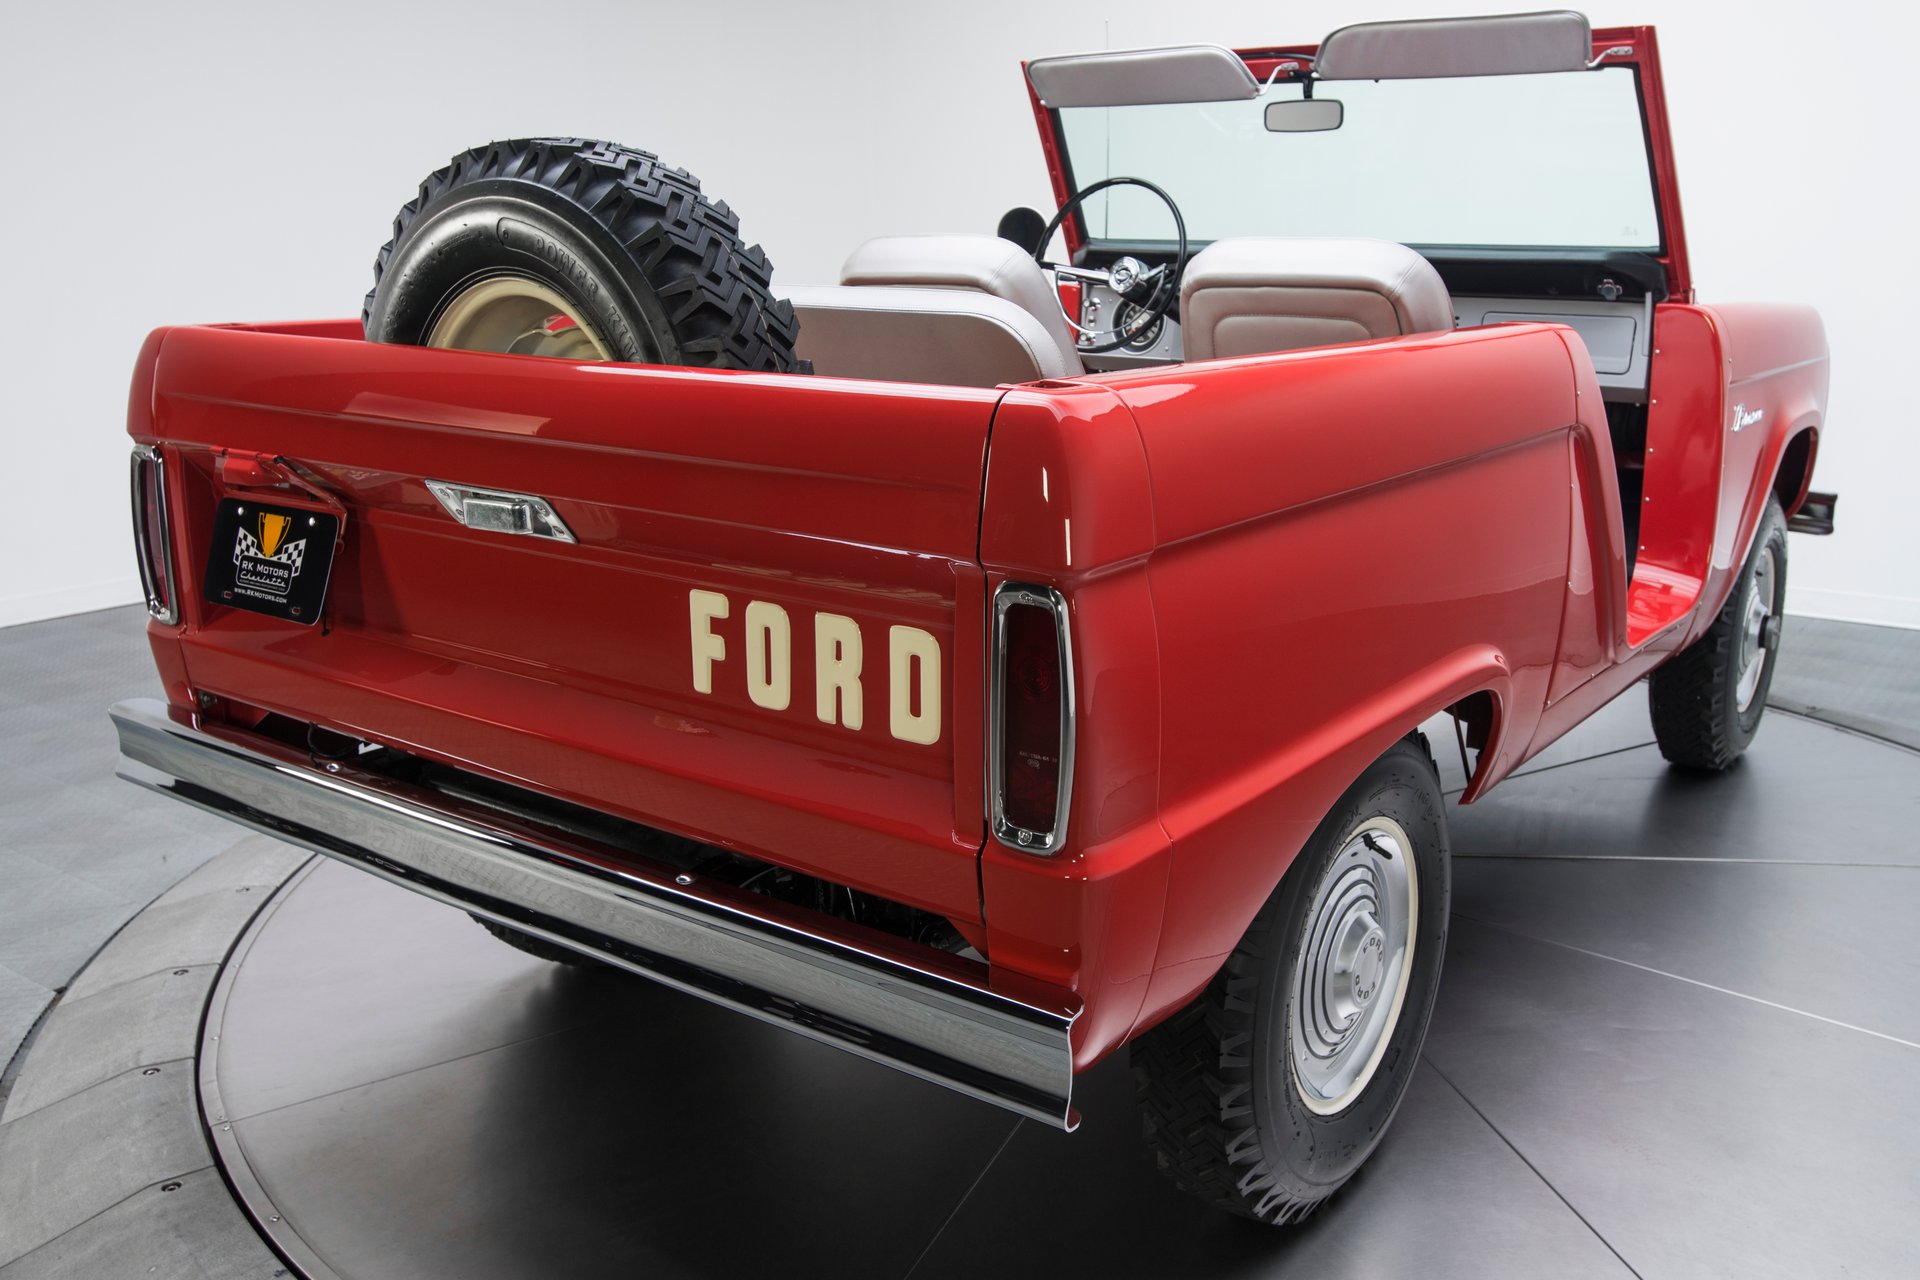 1966 Ford Bronco Rk Motors Classic Cars And Muscle Cars For Sale